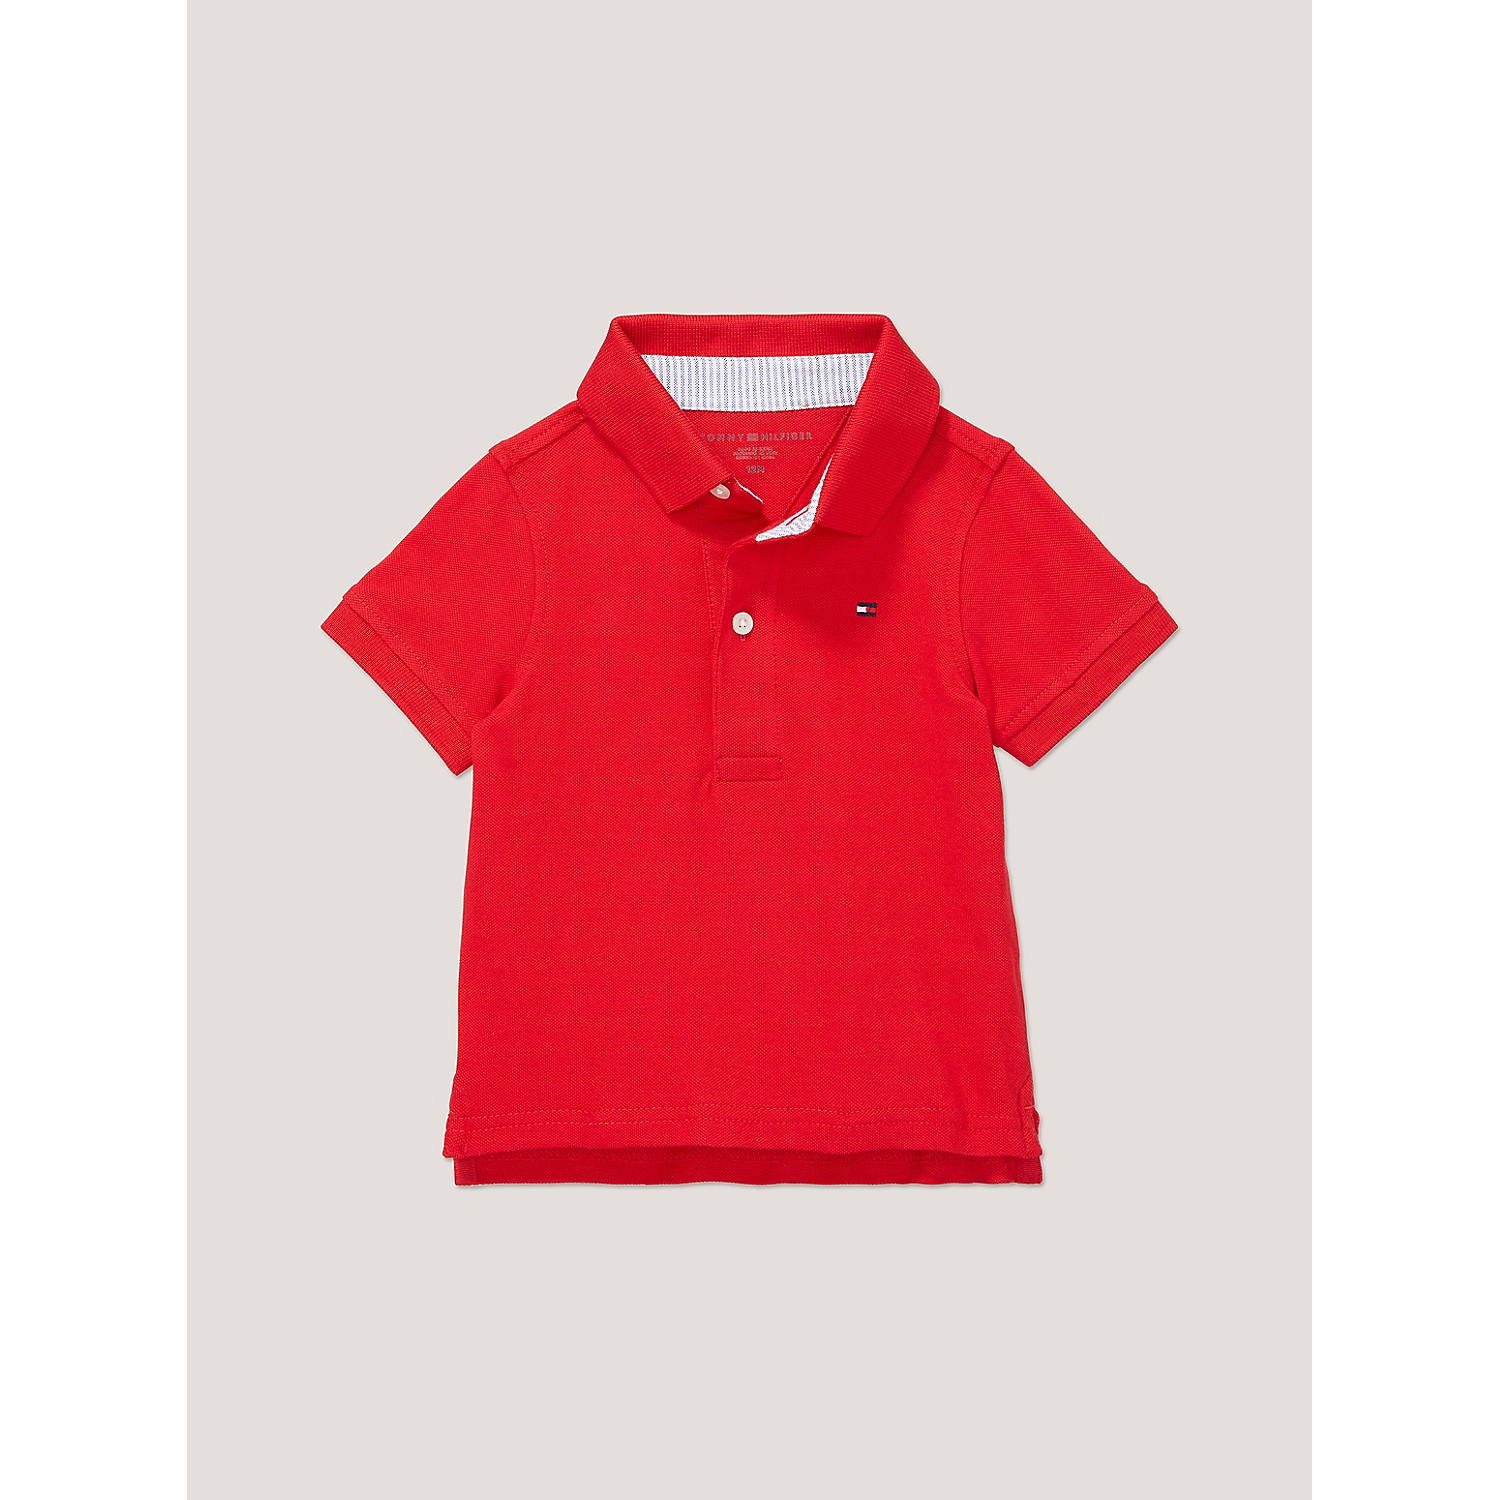 TOMMY HILFIGER Babies Solid Stretch Polo